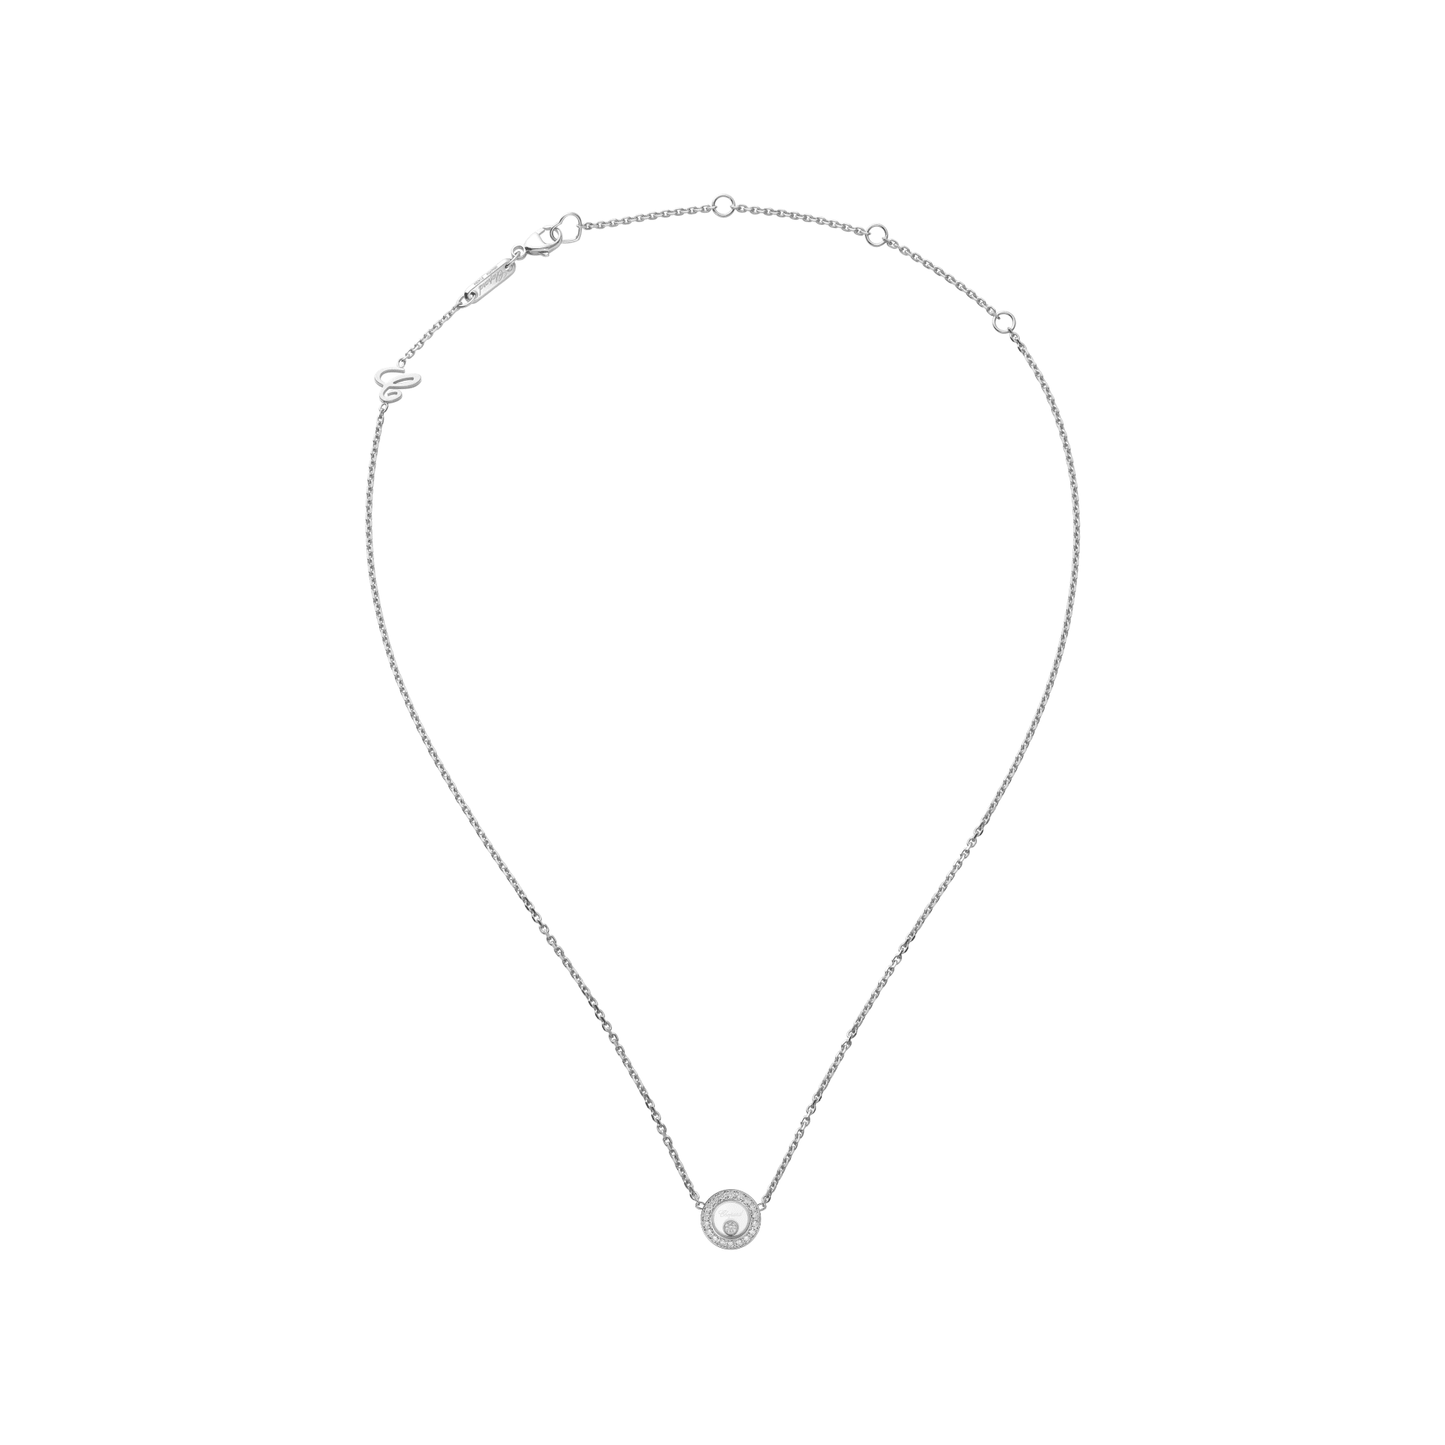 HAPPY DIAMONDS ICONS NECKLACE, ETHICAL WHITE GOLD, DIAMONDS 81A017-1201